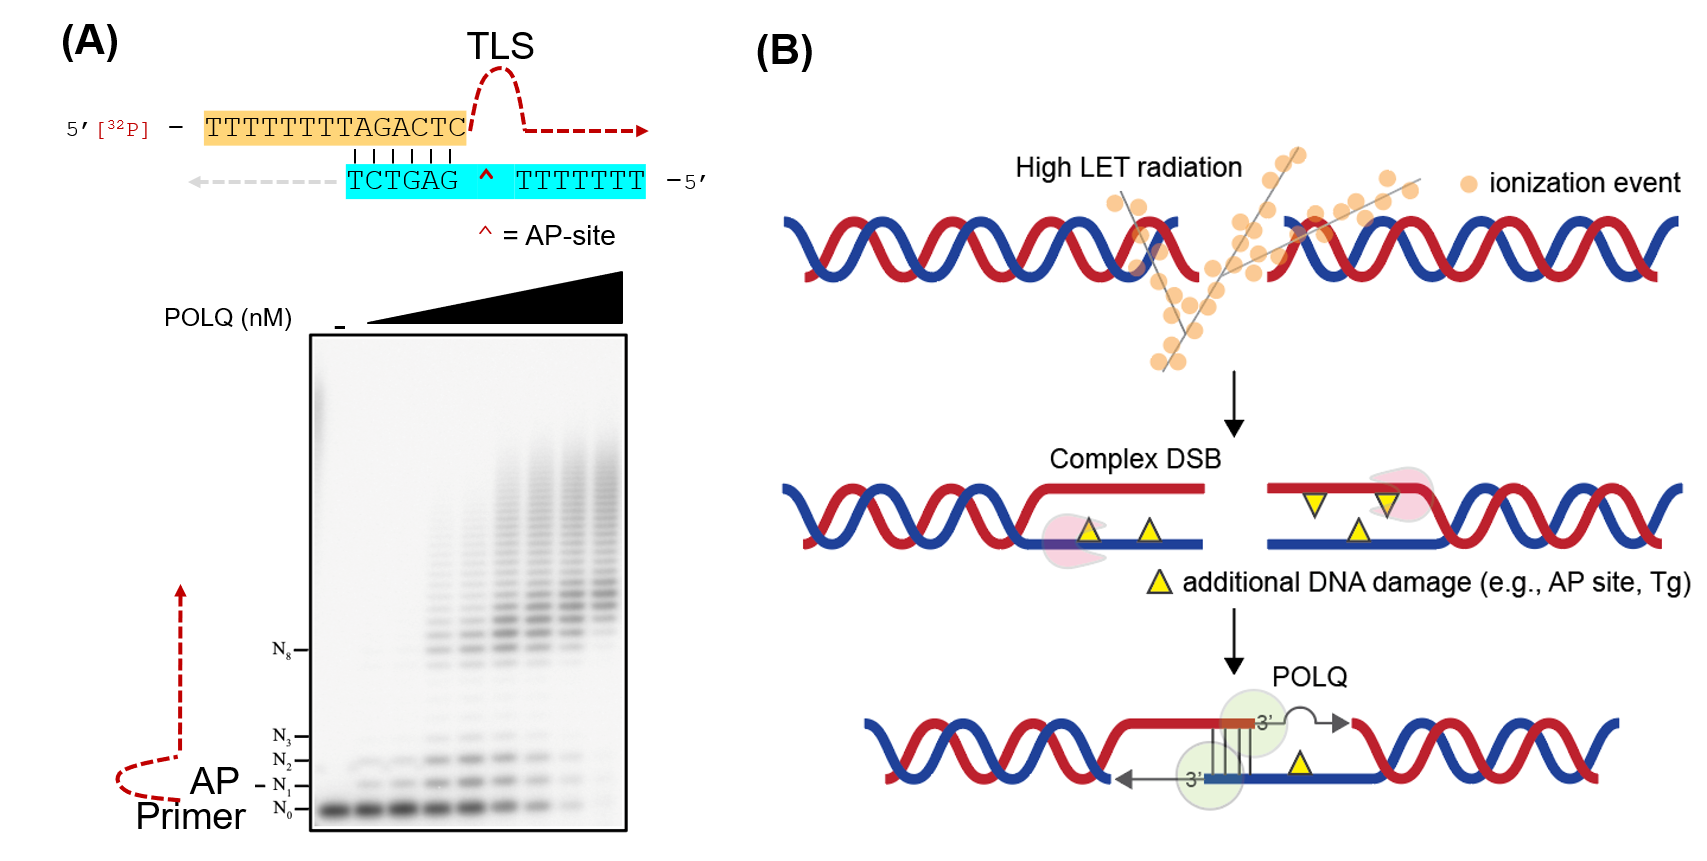 Figure 2. (A) POLQ is able to anneal two single-stranded DNA tails utilizing a short homology sequence and is able to bypass DNA damage. (B) A model of POLQ-mediated repair following high LET radiation. POLQ promotes synapsis formation of the two resected 3’-single-stranded DNA tails and efficiently bypasses DNA damage located on the tails.